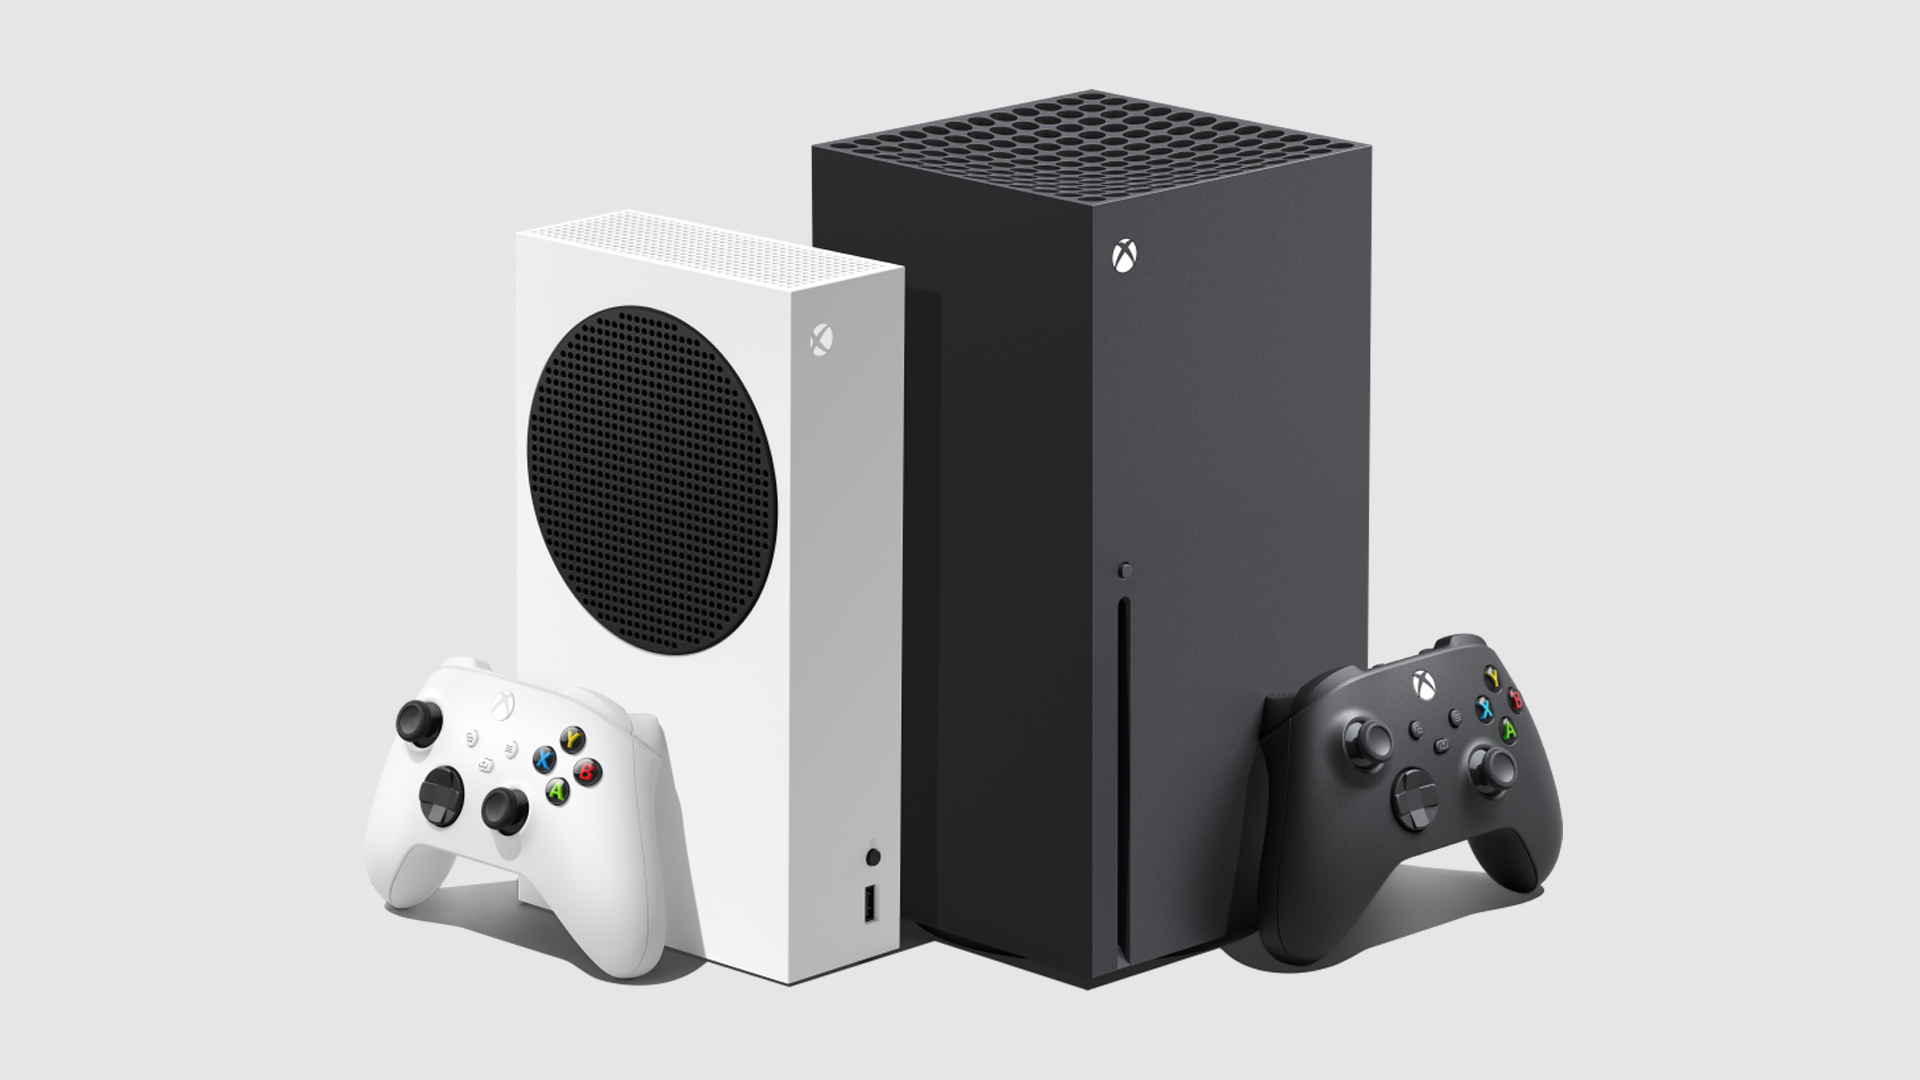 Xbox Series X and Xbox Series S: Designing the Next Generation of